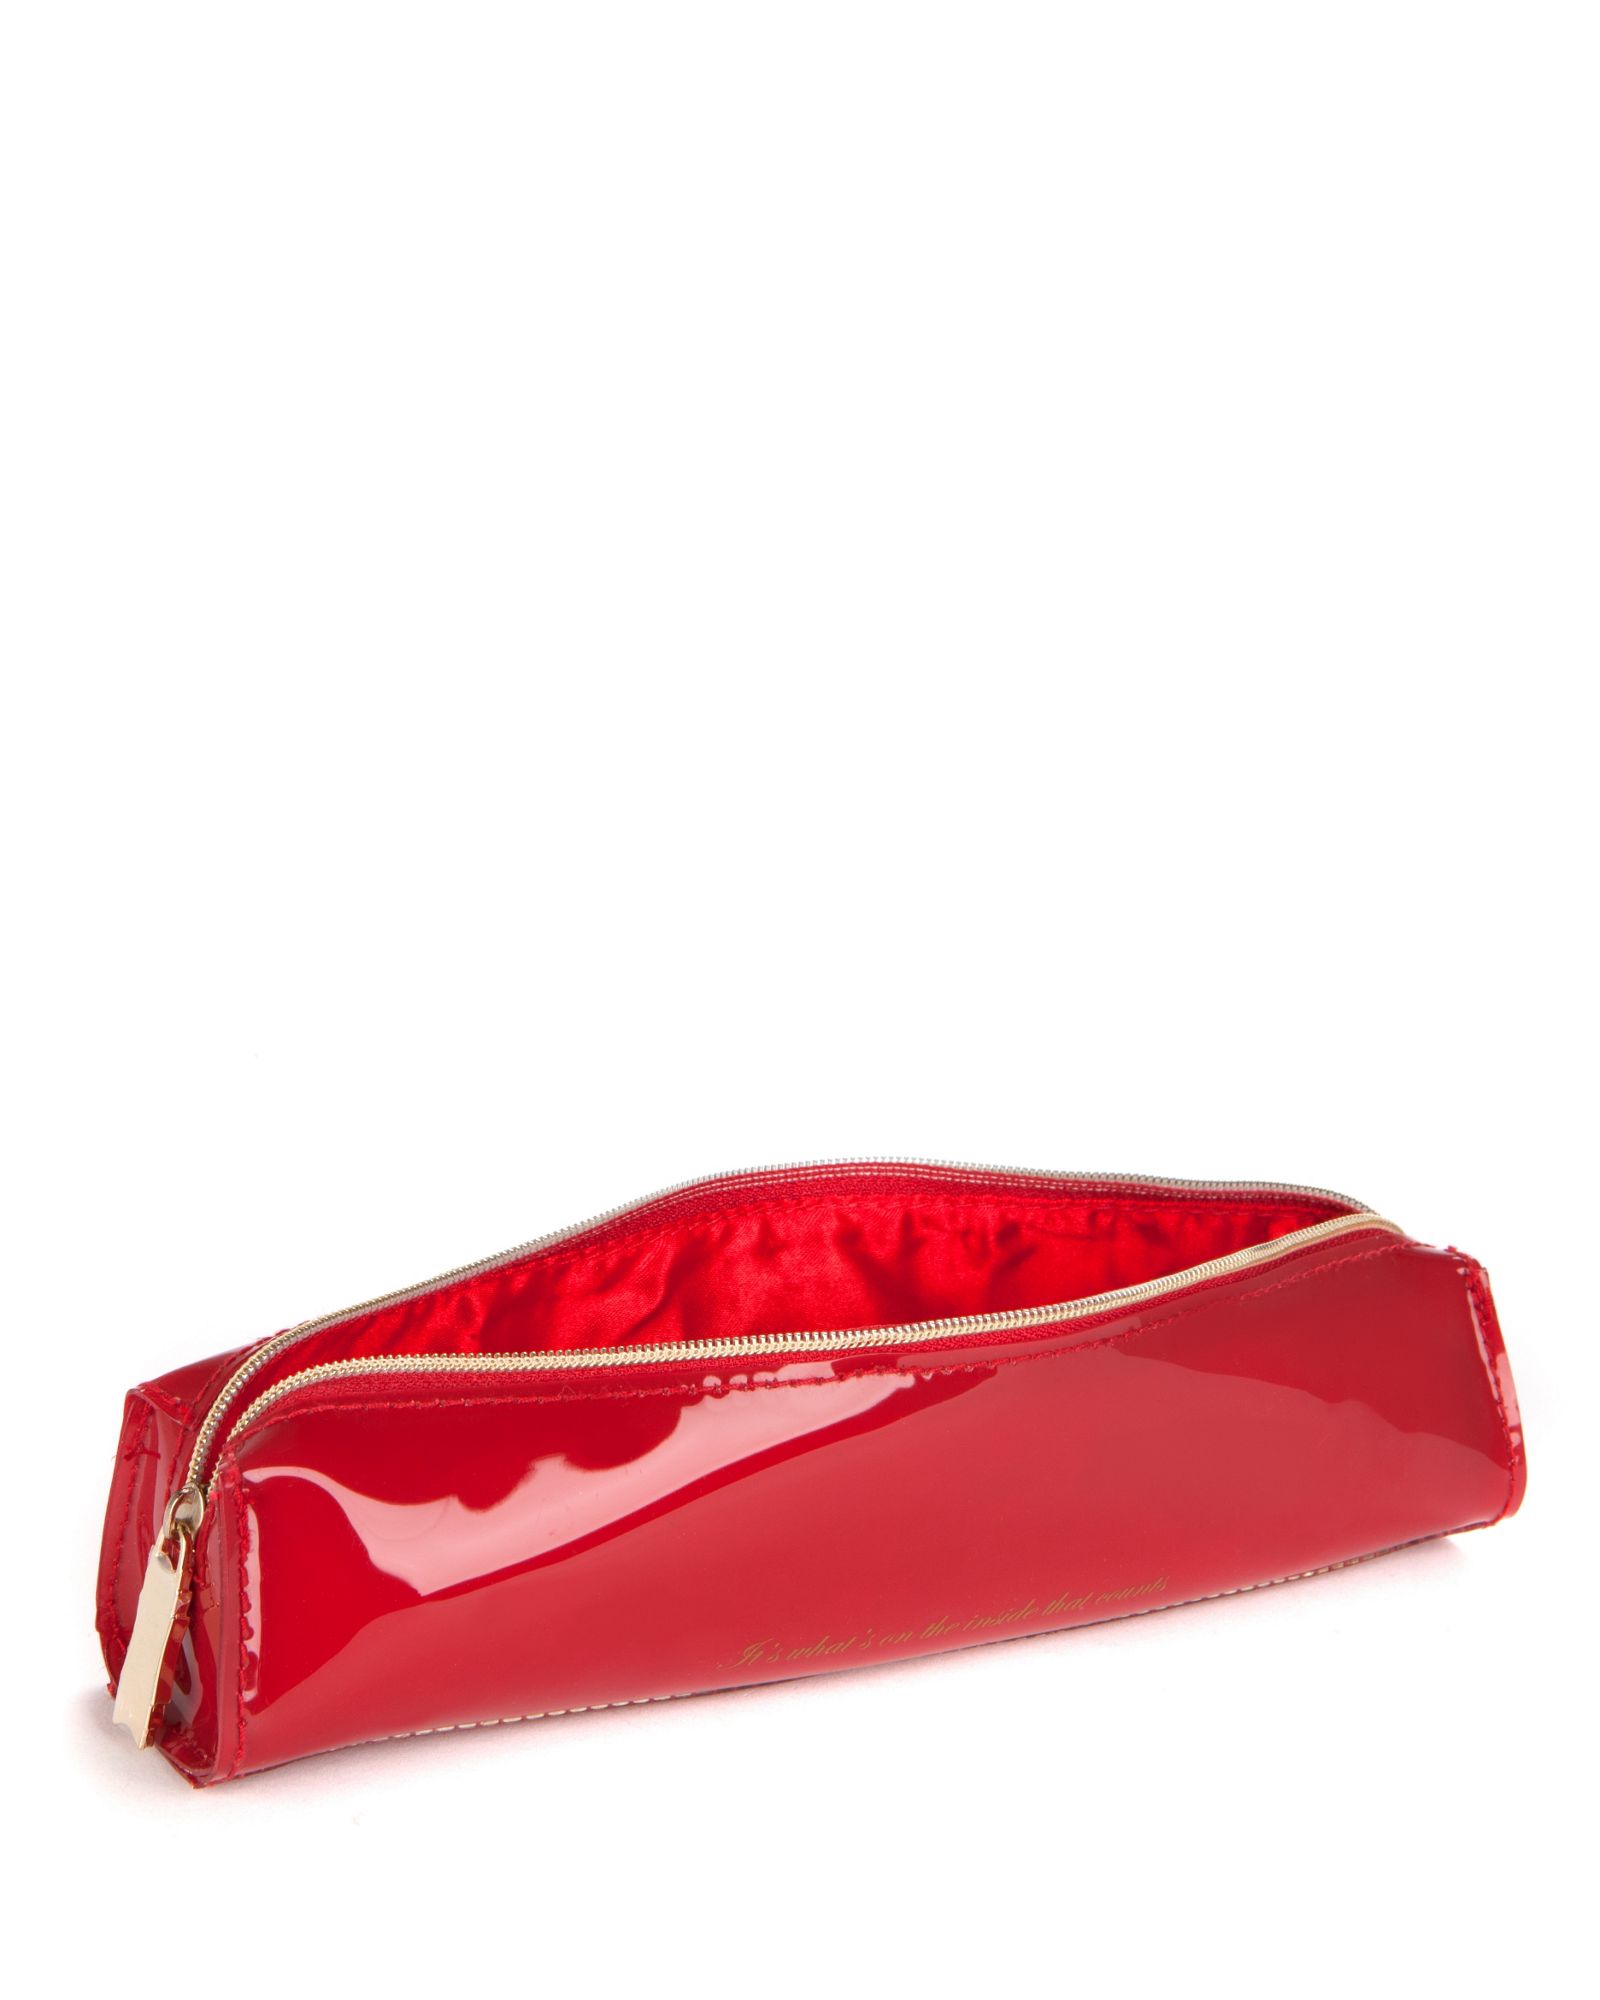 Ted baker Twinxx Glitter Bow Pencil Case in Red | Lyst